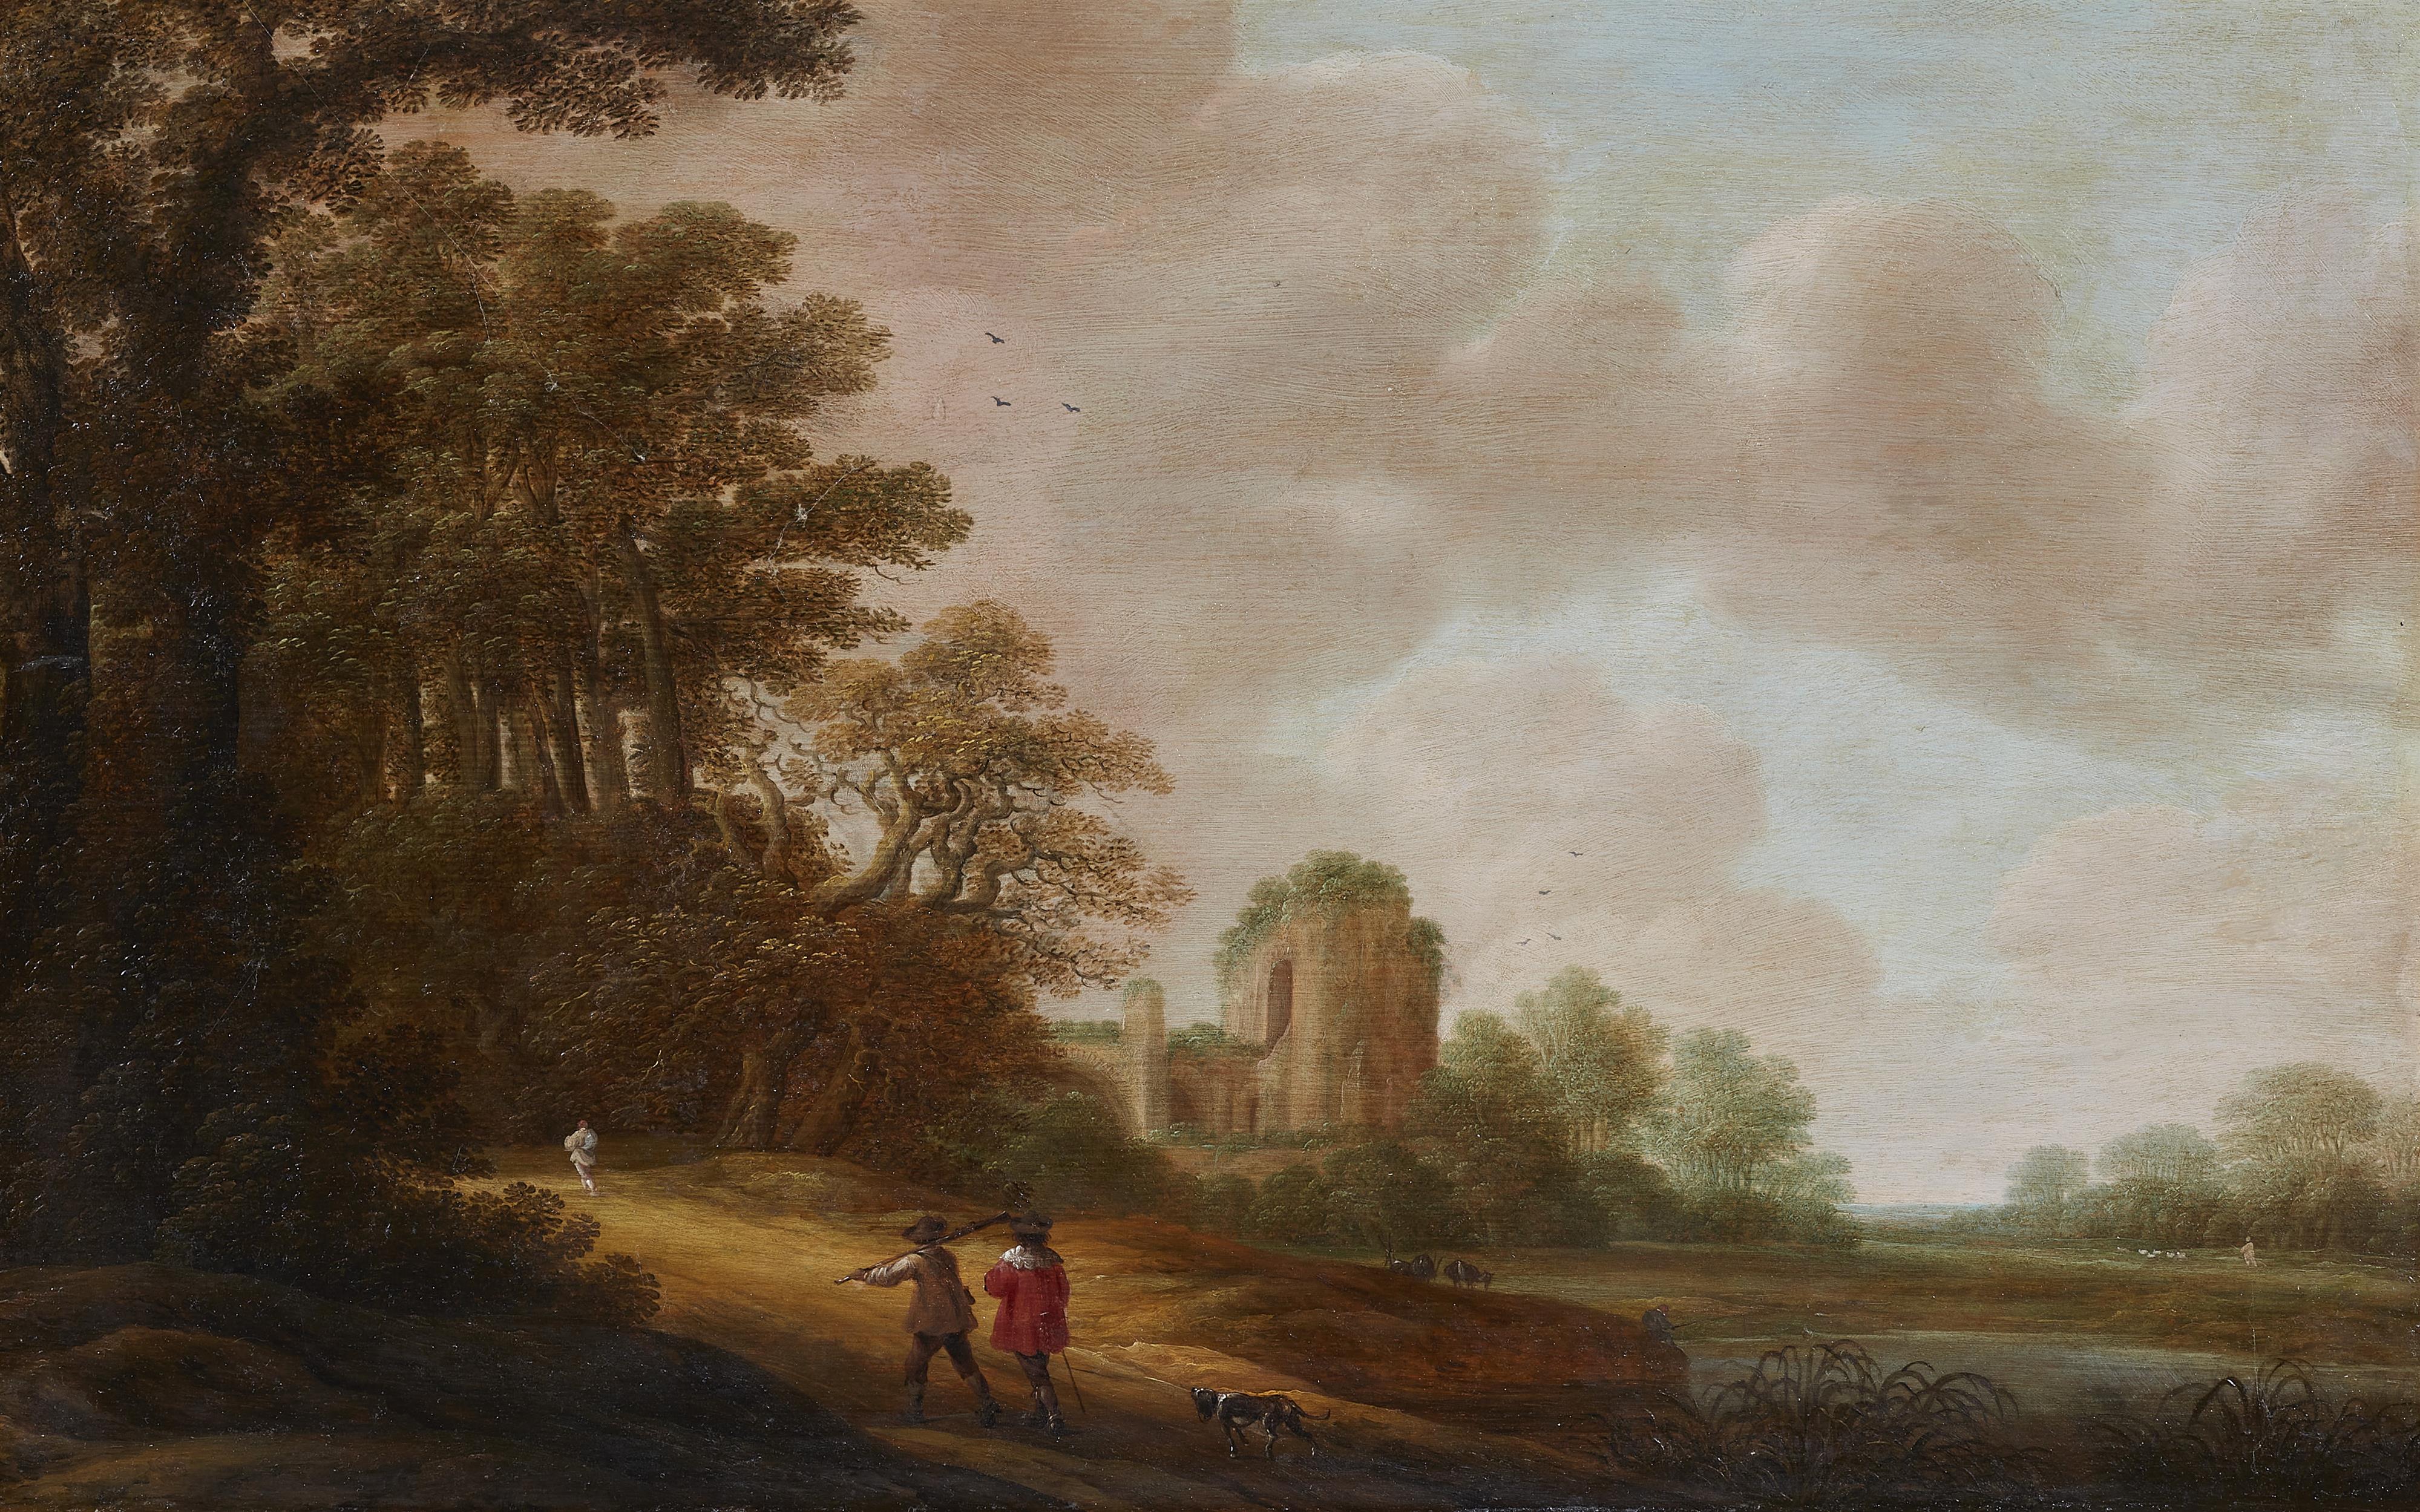 Pieter Jansz. van Asch - Wooded Landscape with two Hunters and a Ruined Church - image-1